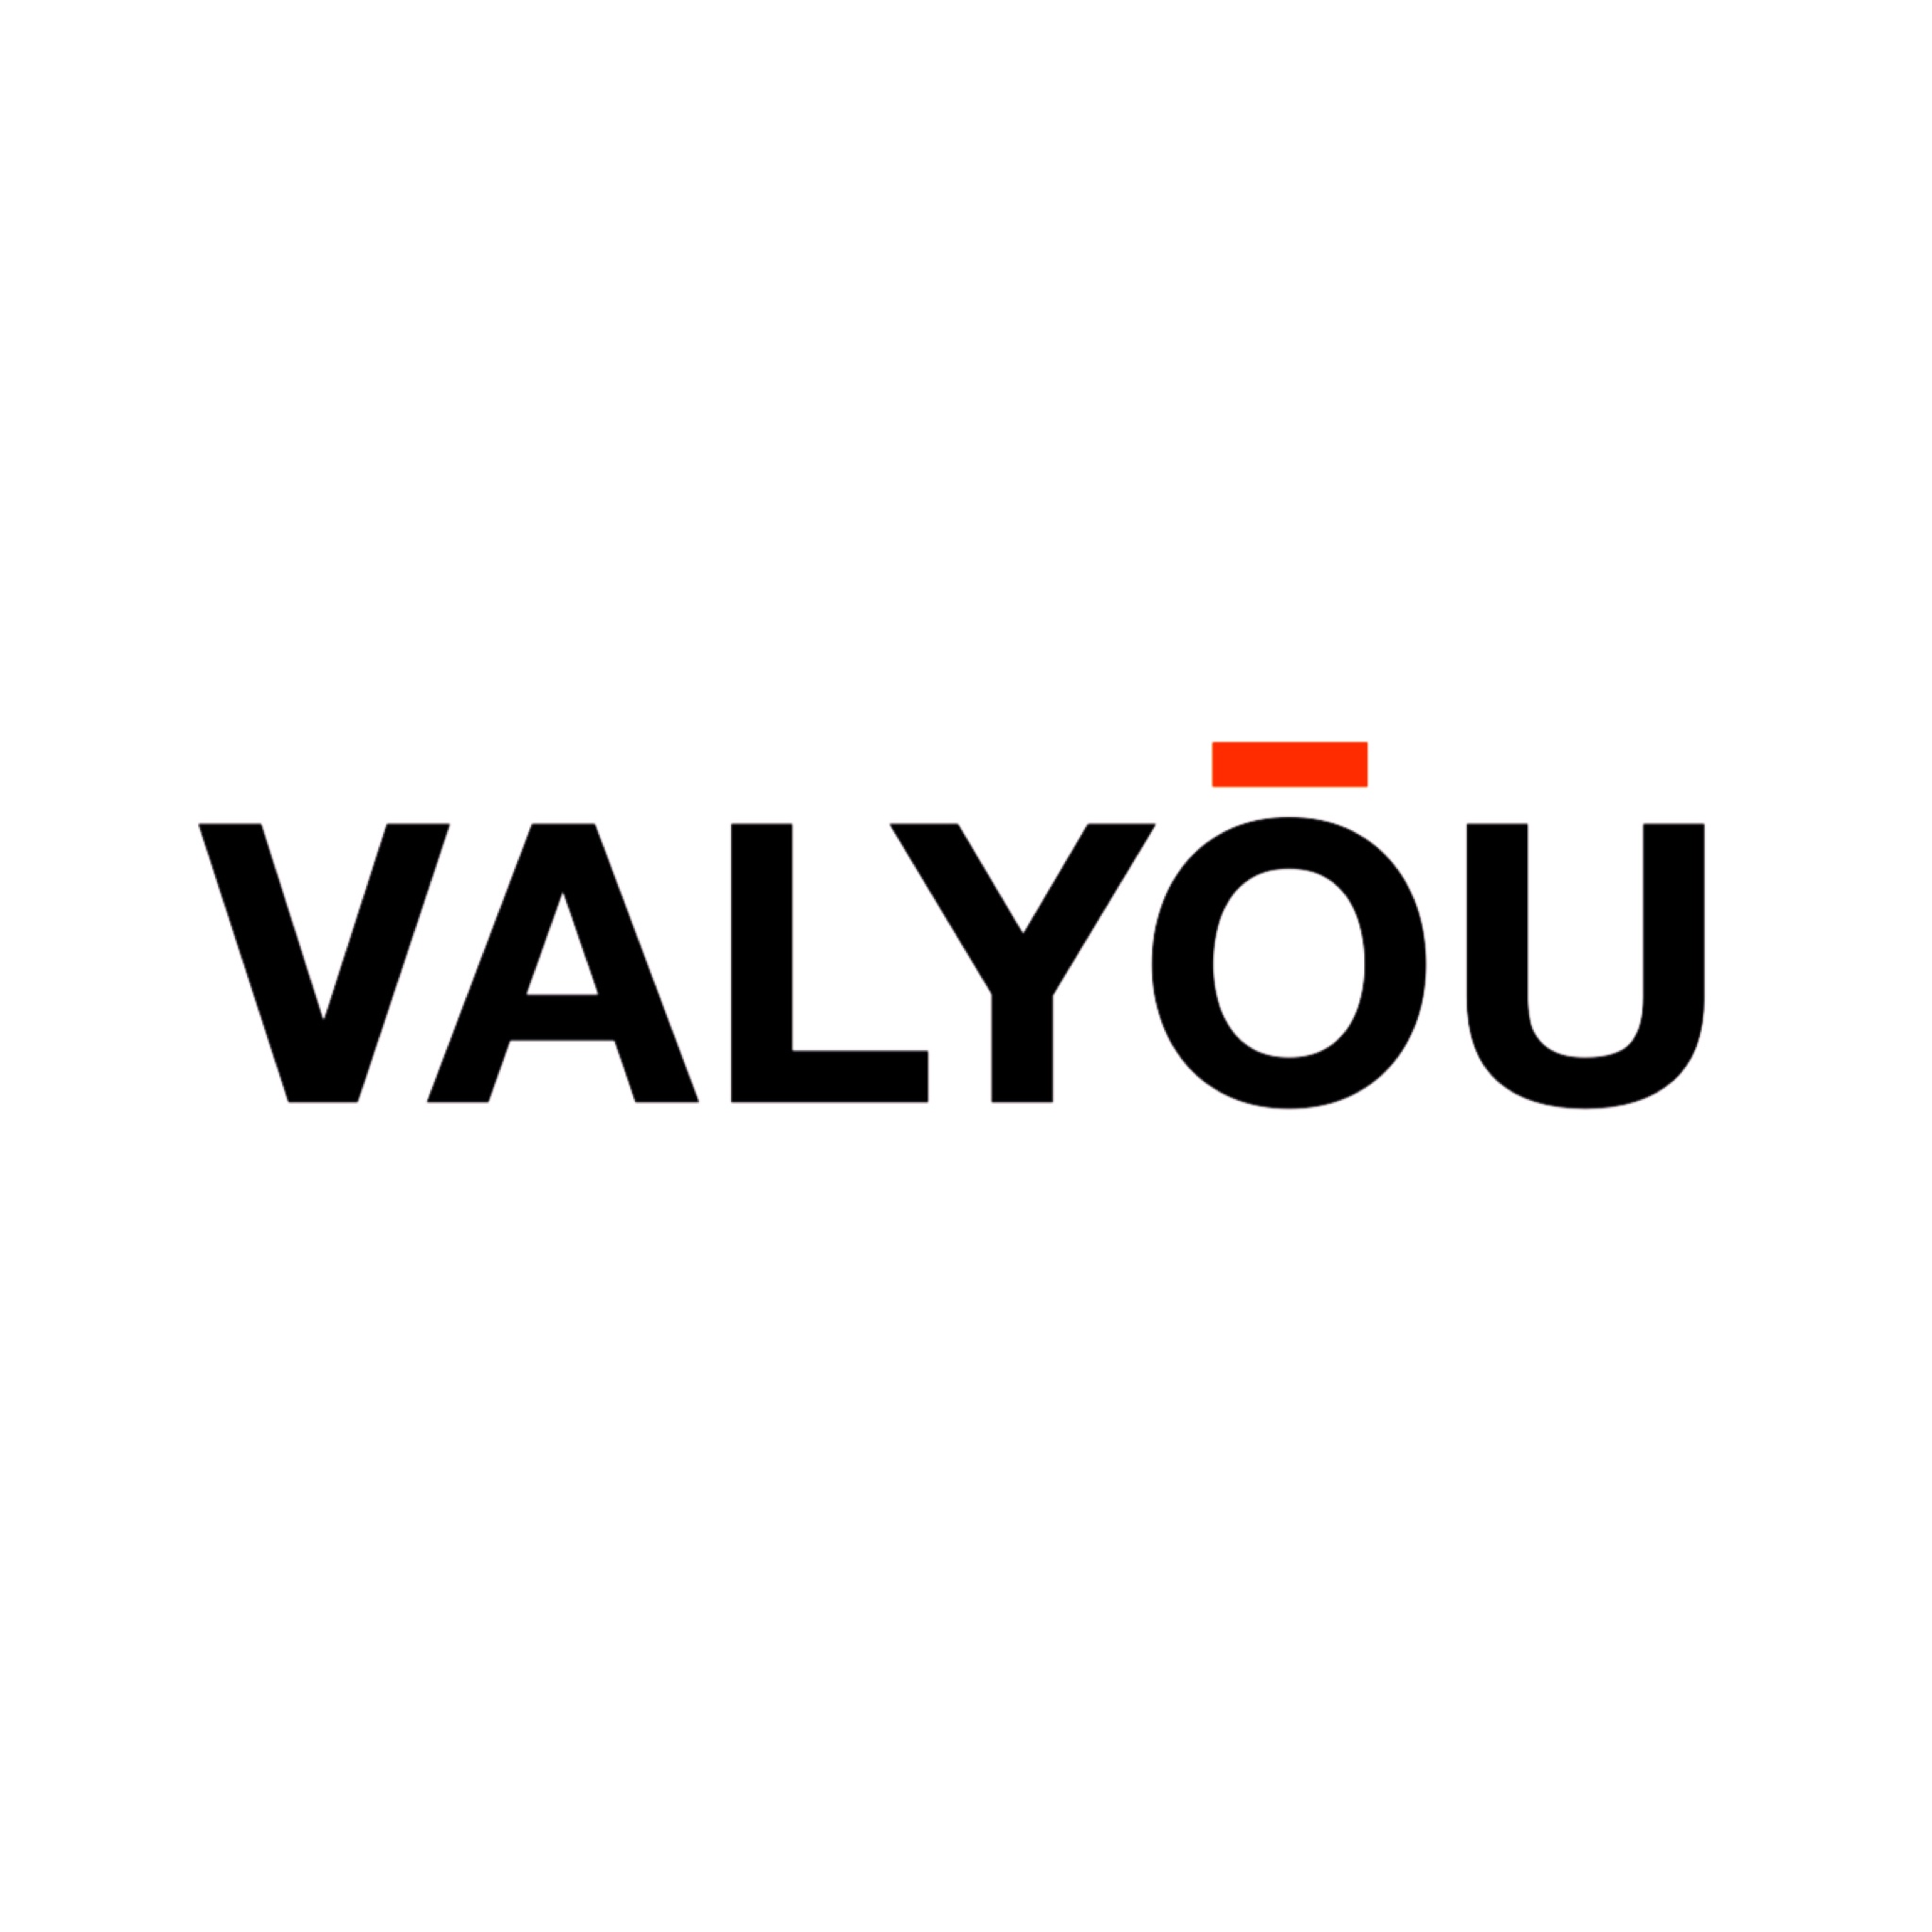 United States agency Altered State Productions helped Valyou Furniture grow their business with SEO and digital marketing